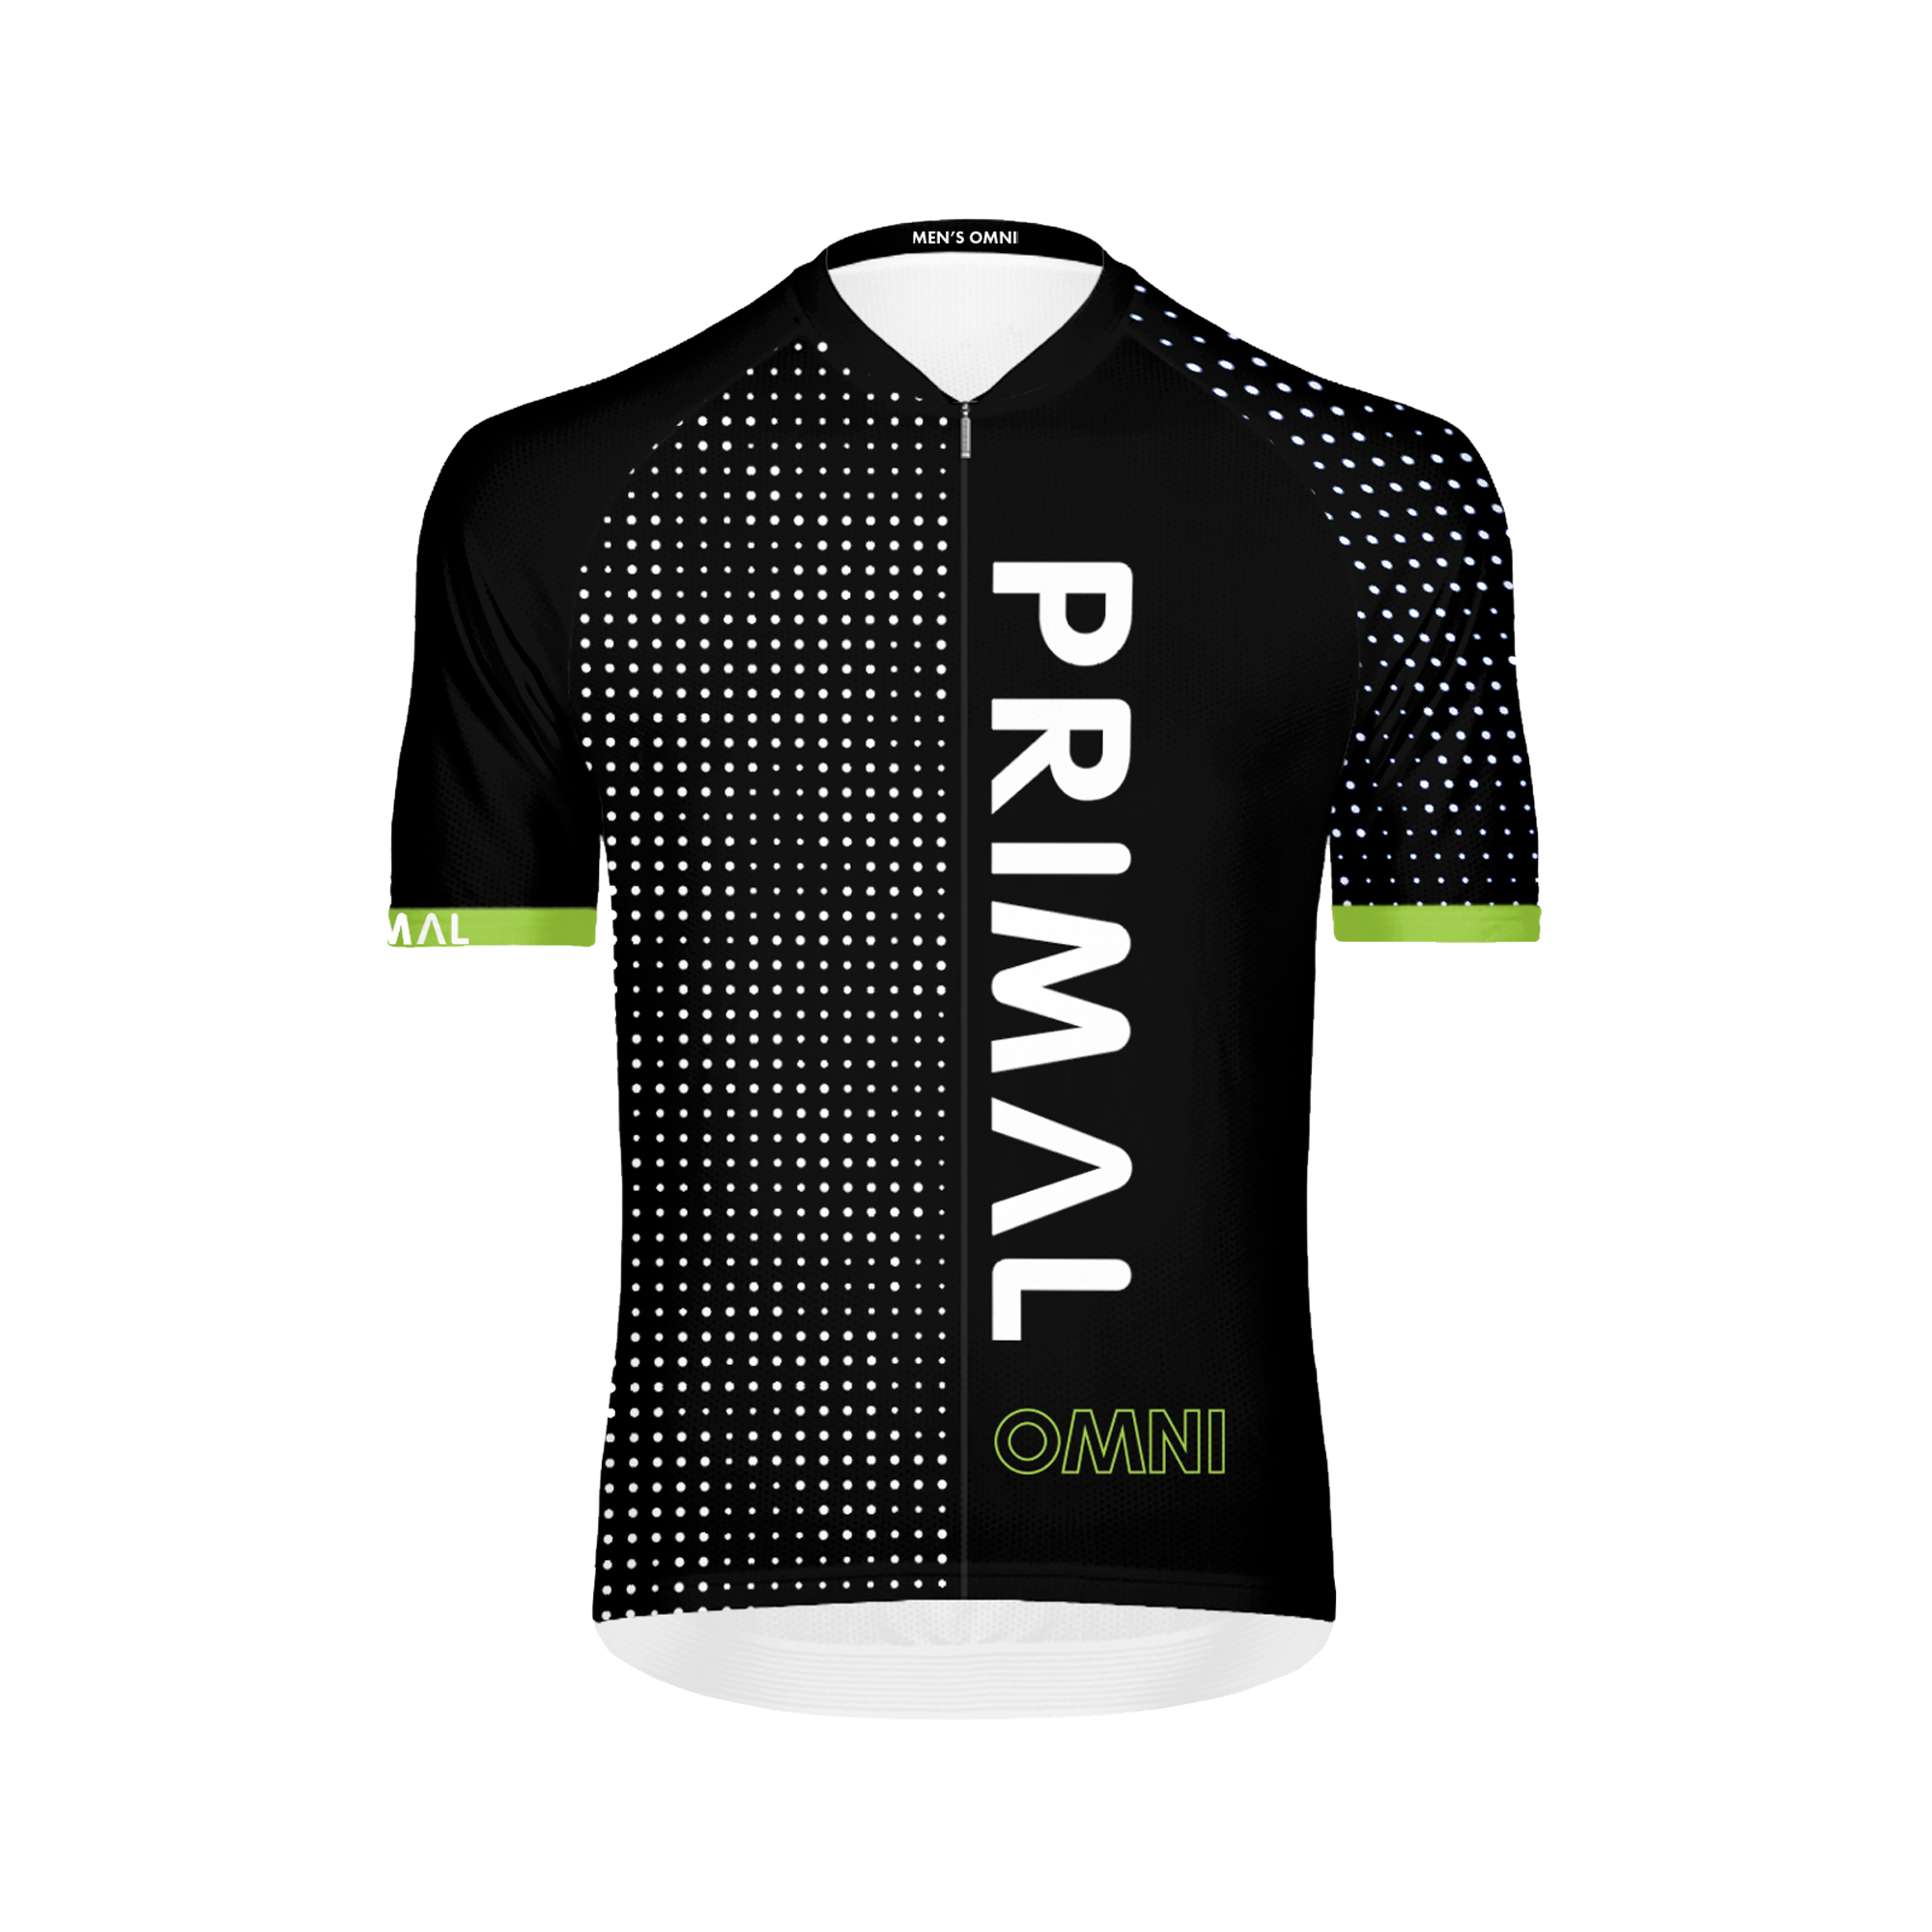 Cycling Jersey Primal Wear Spry Omni Men's Full Zip Slim Fit Cycling  Jersey